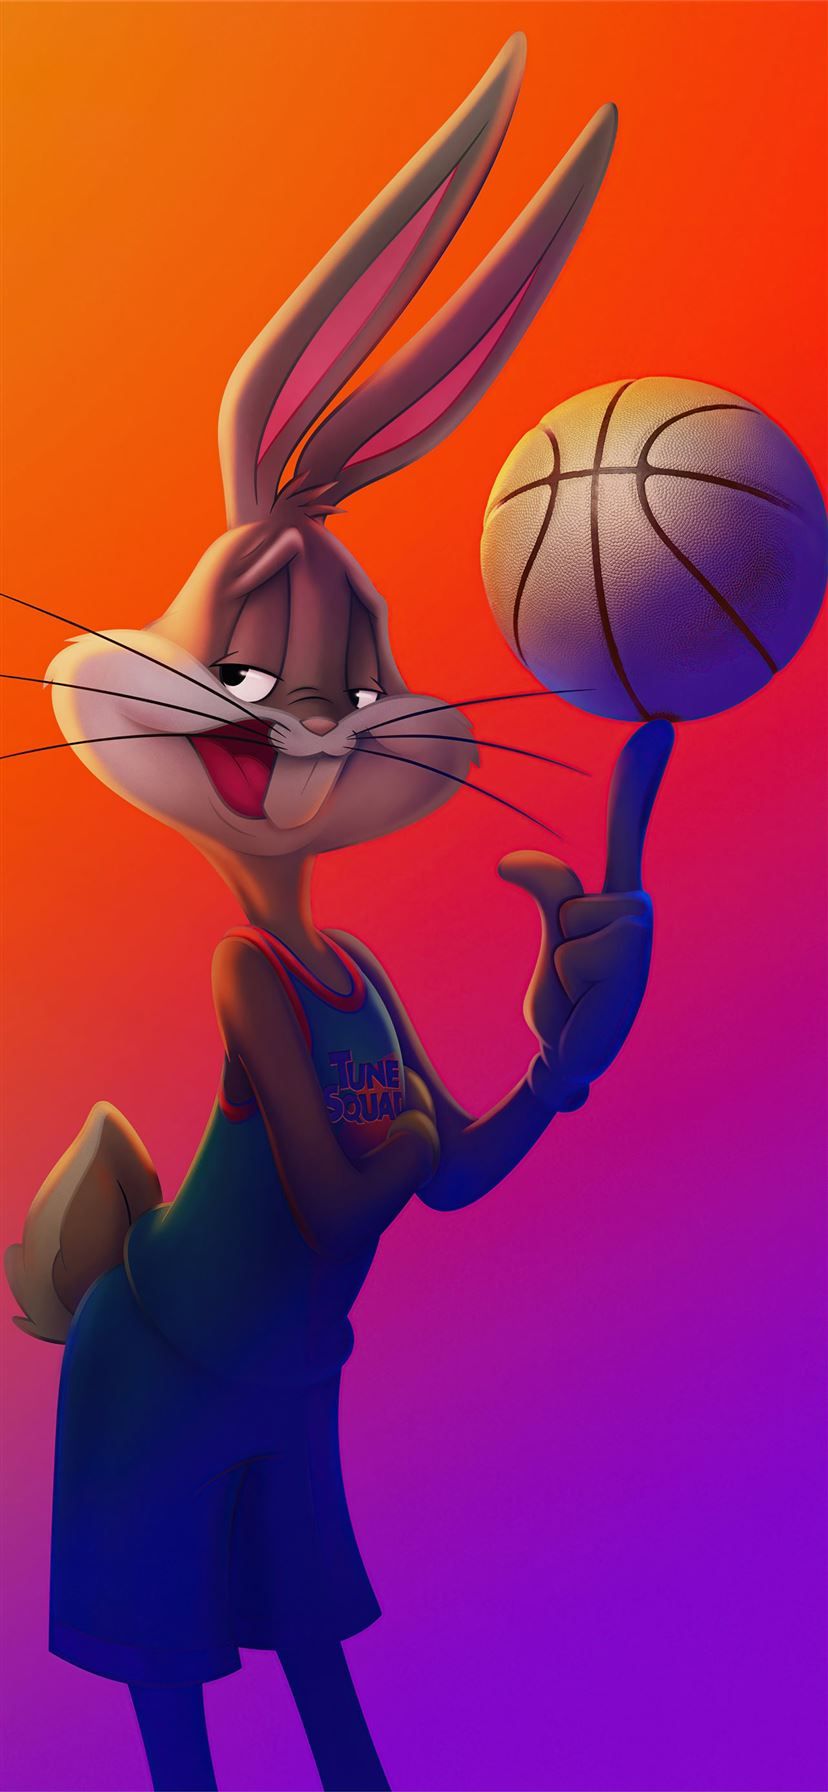 bugs bunny space jam a new legacy 8k iPhone 11 wallpaper. Looney tunes wallpaper, Bunny wallpaper, Bugs bunny